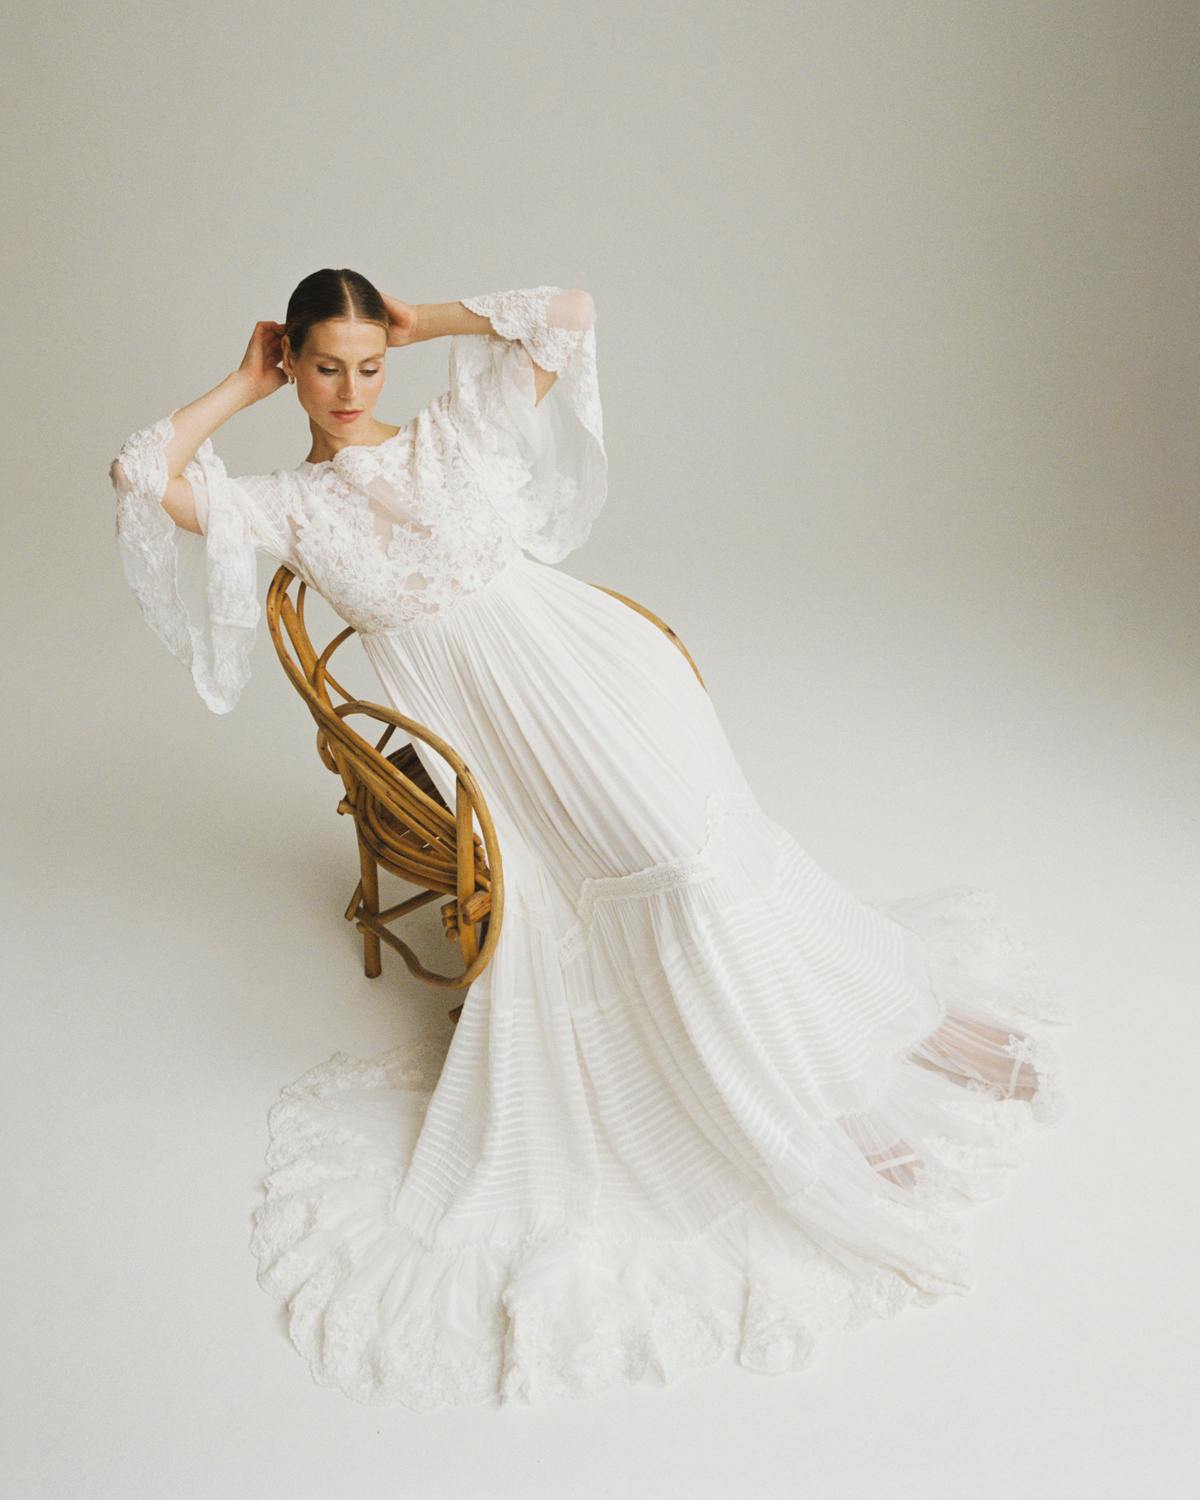 The Bridal Gown, Vintage White. Image #3